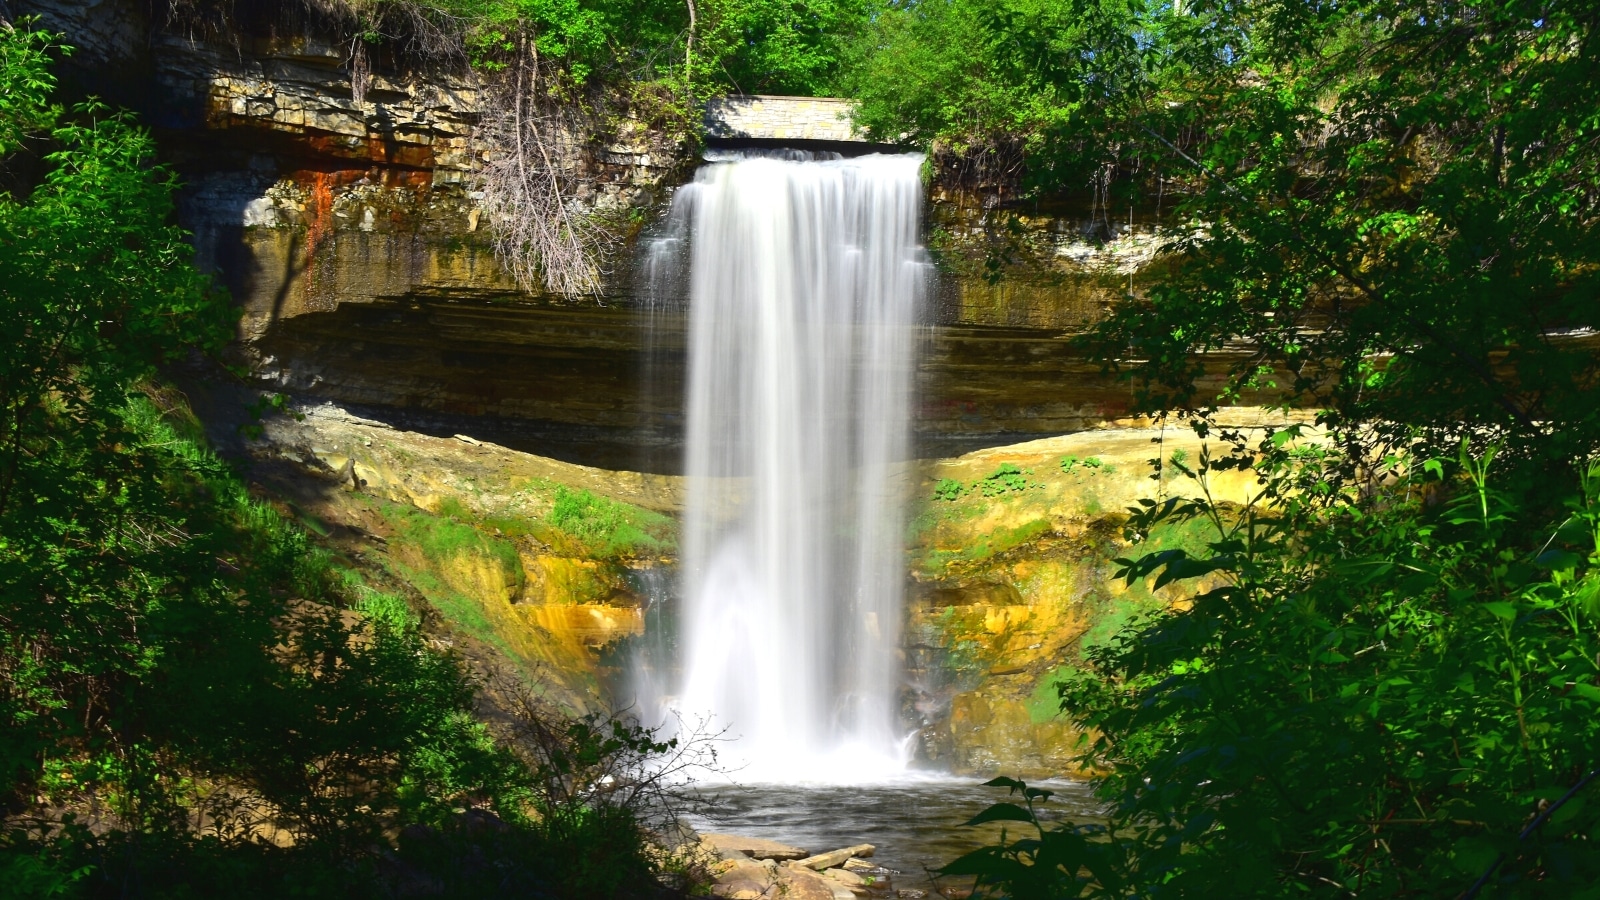 View of Minnehaha Falls, nestled within Minnehaha Park in Minneapolis. The waterfall cascades gracefully over a limestone ledge, creating a mesmerizing drop into a clear pool below. Surrounded by lush greenery, the falls are embraced by a picturesque setting of towering trees.